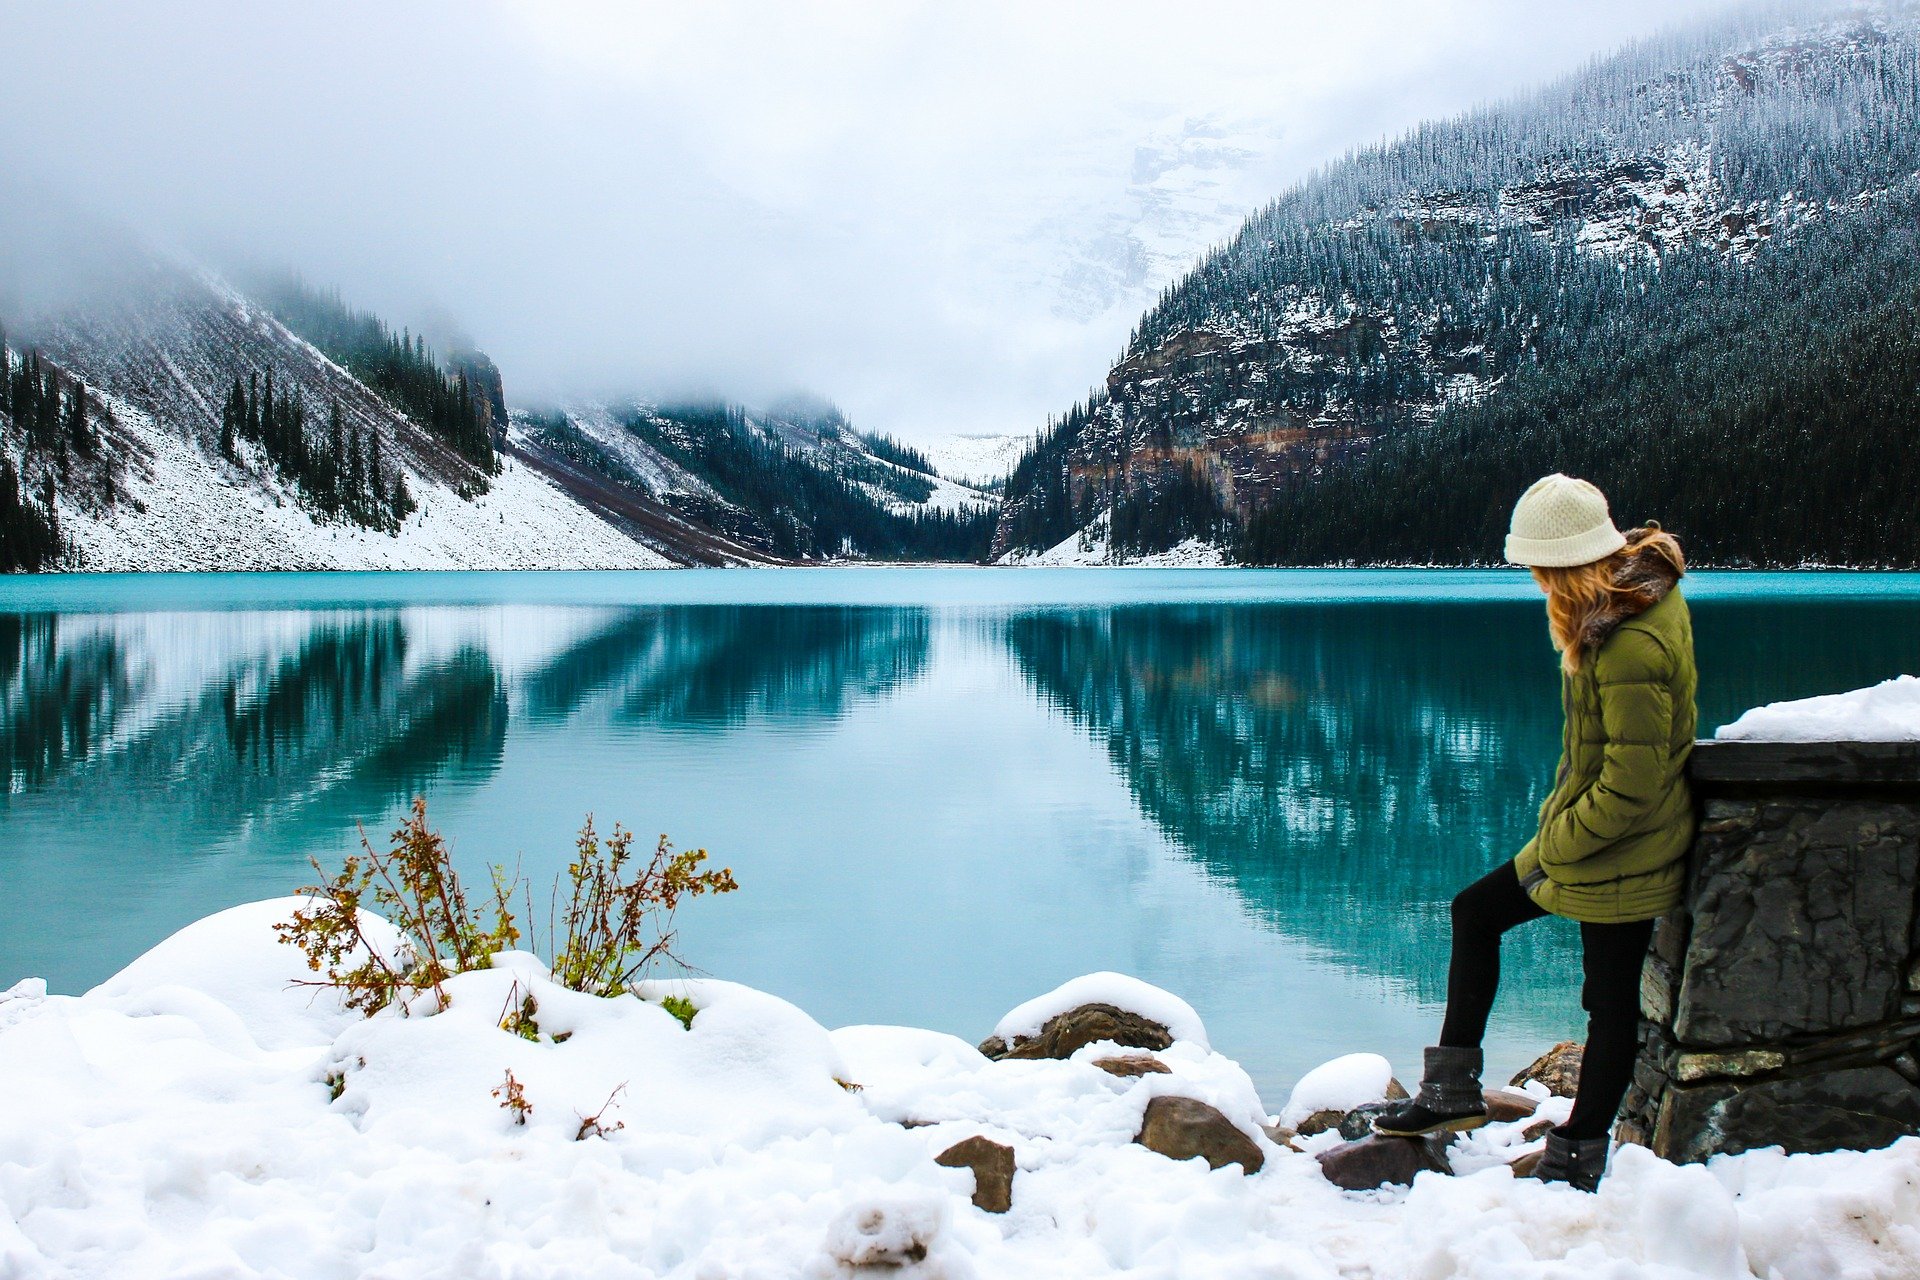 A hiker in a puffer jacket by a lake.